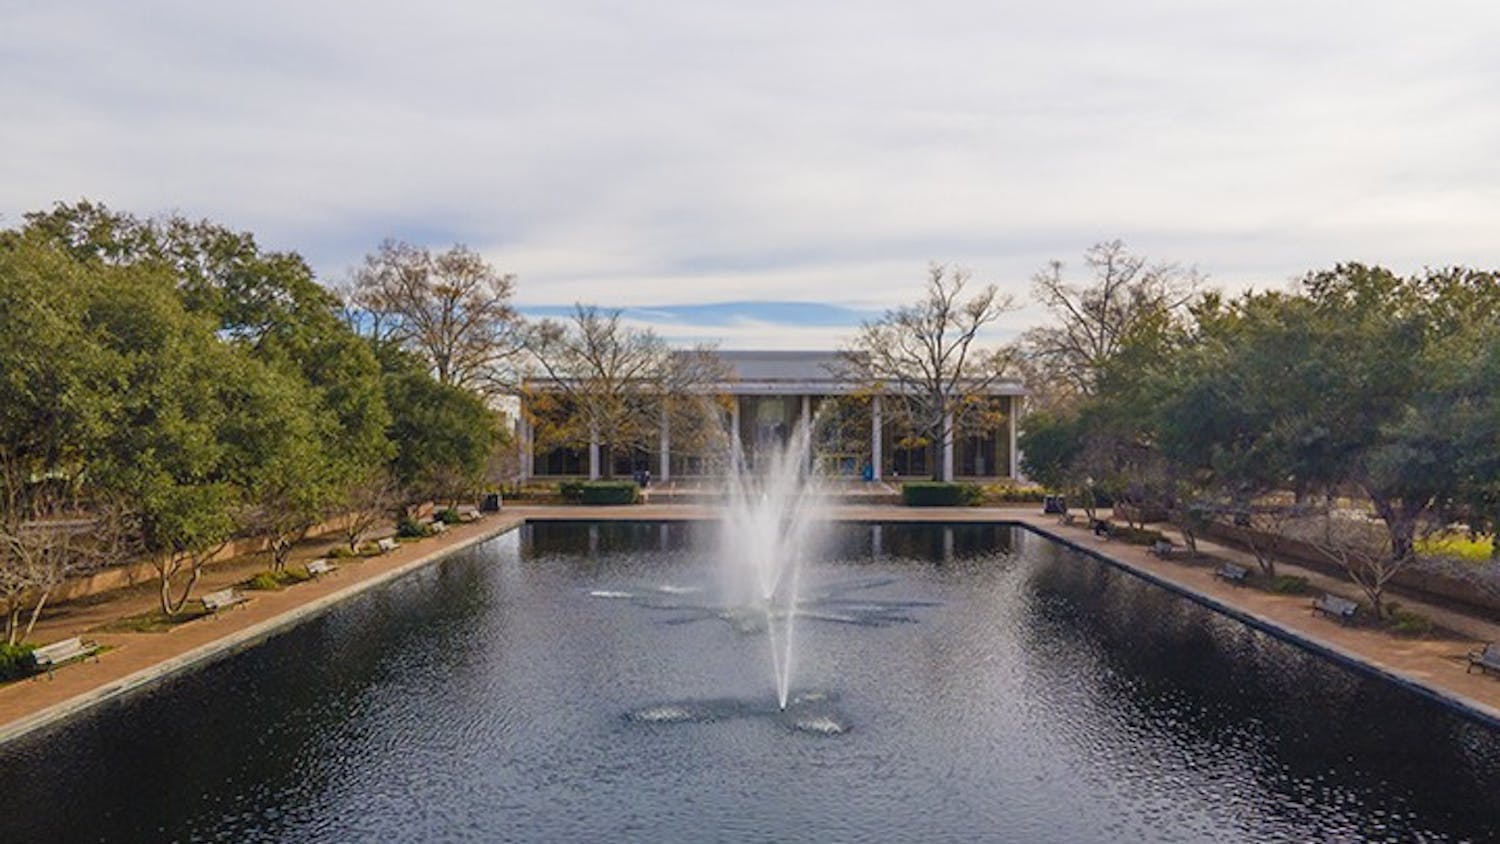 Aerial shot of Thomas Cooper Library showing the reflecting pool, which has benches, often used as study spots, lining it.